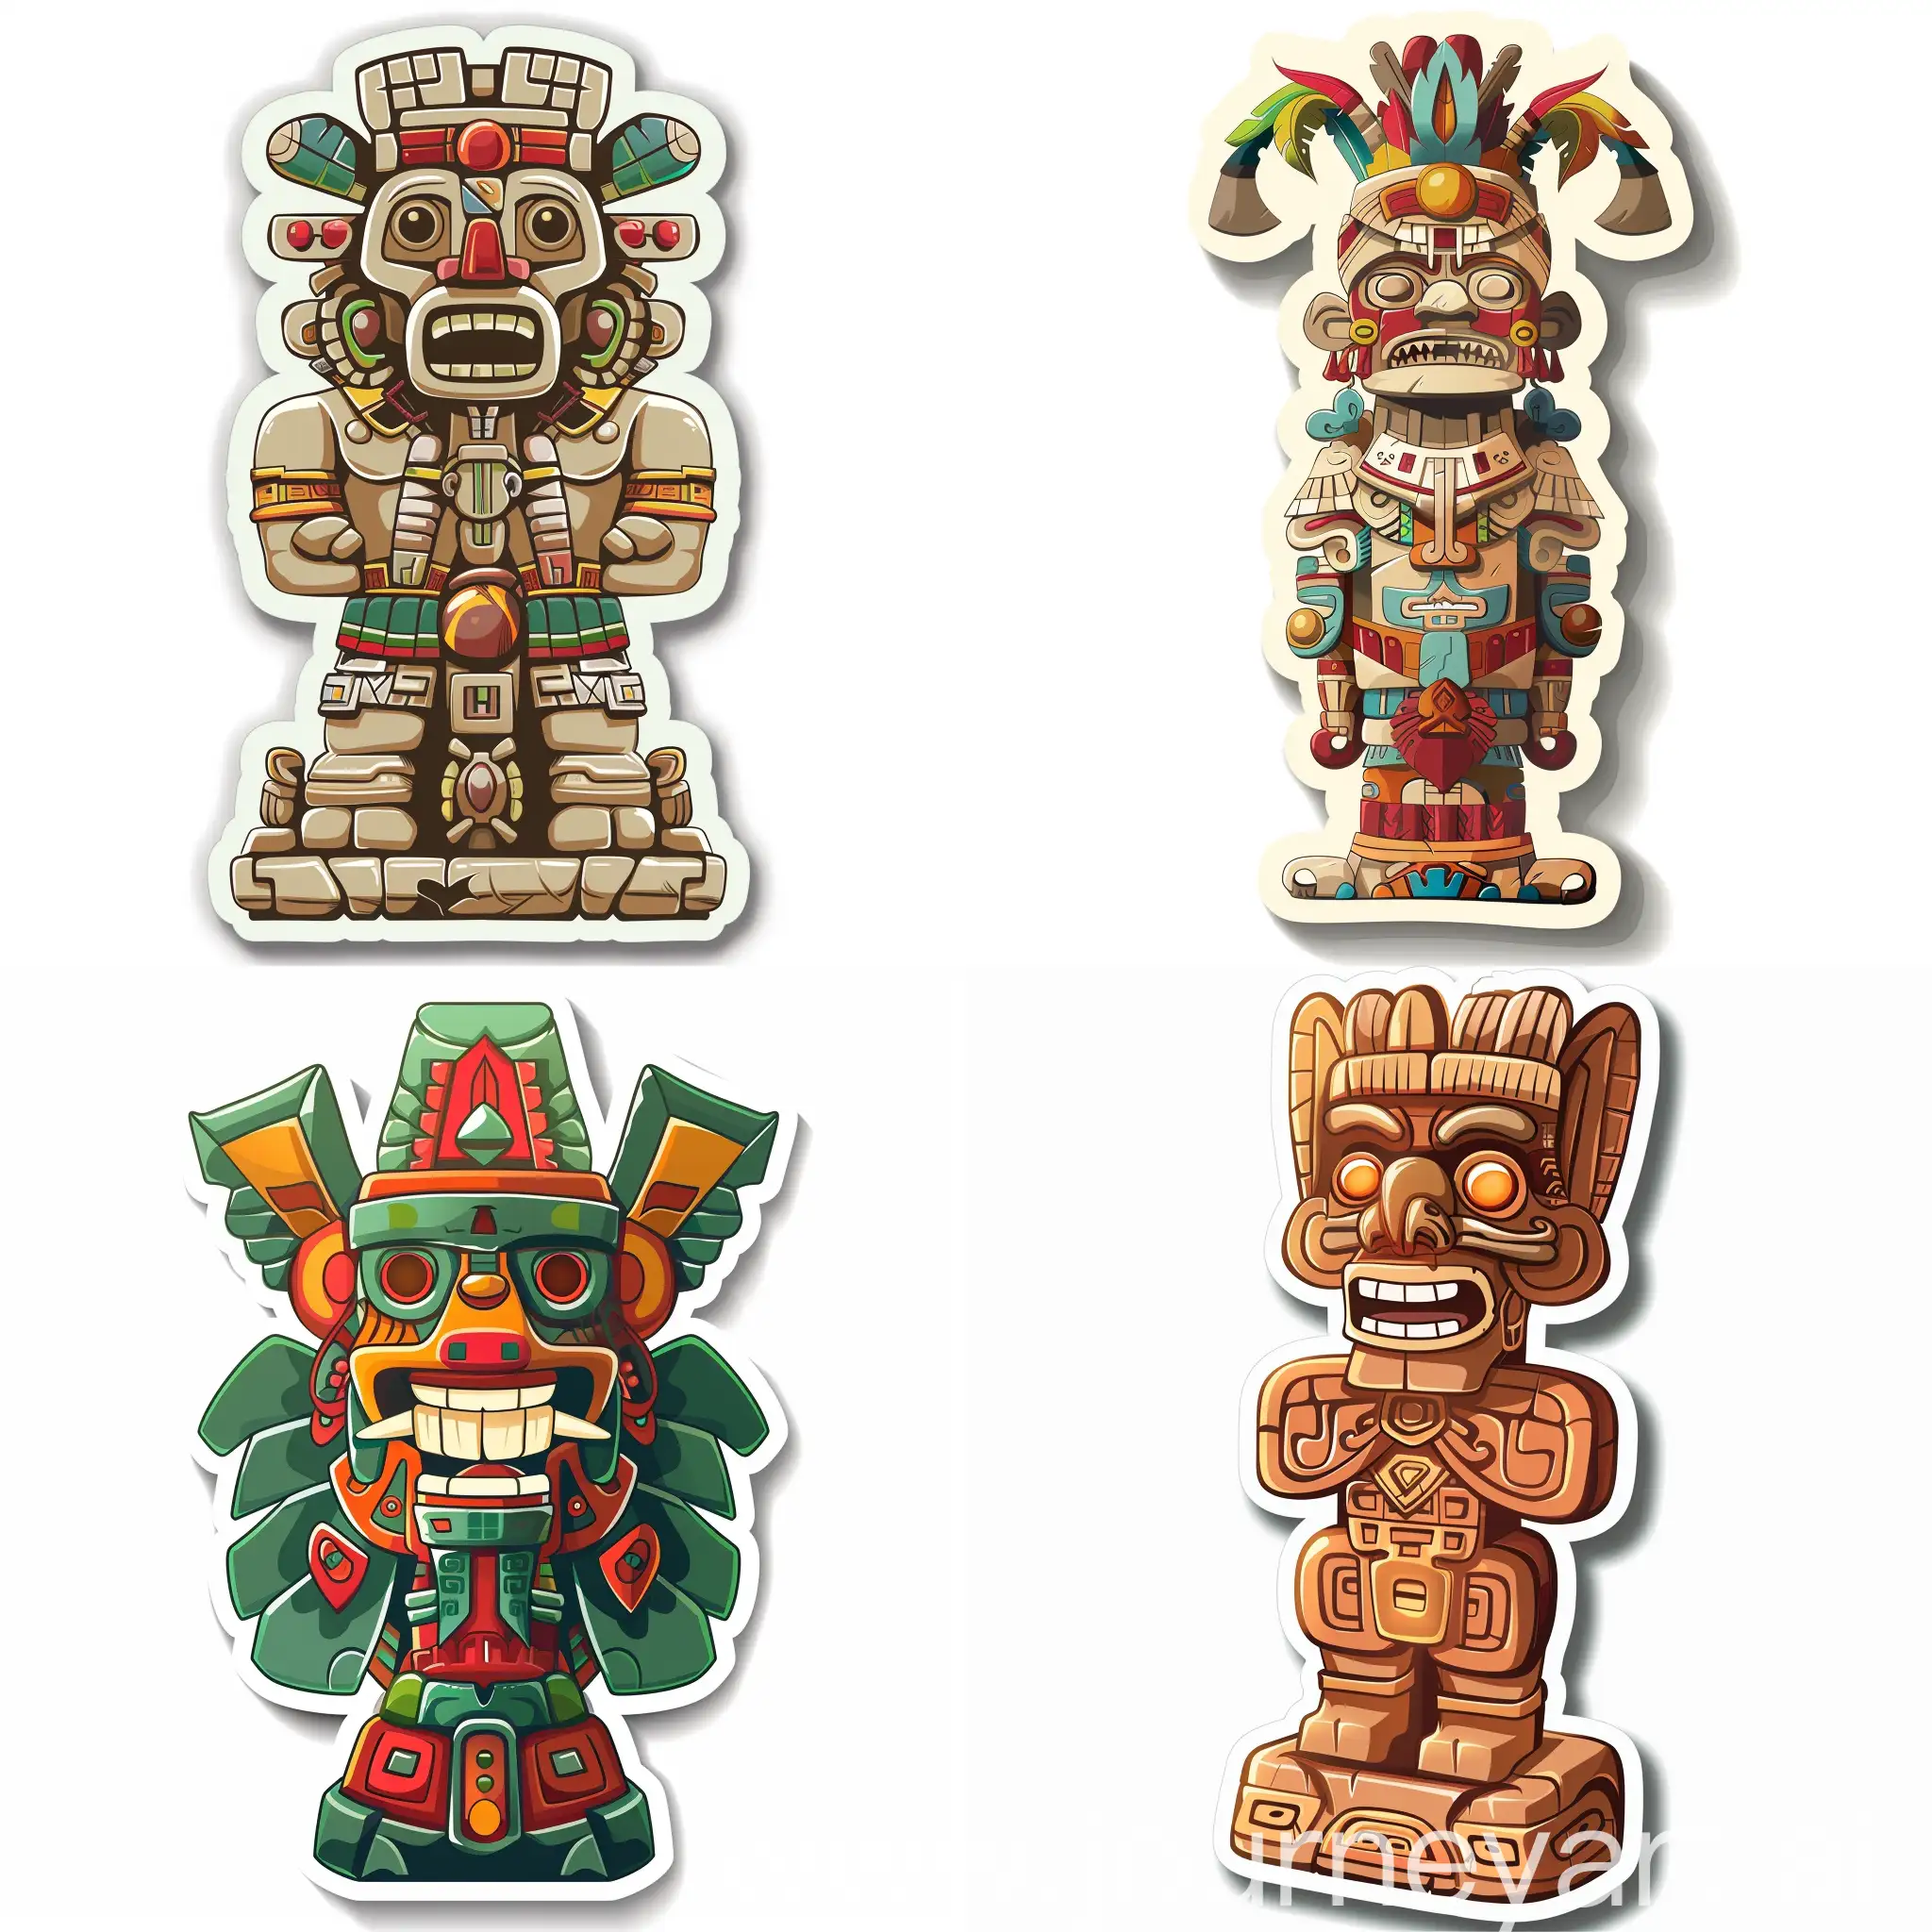 Colorful-Cartoon-Mayan-Totem-Sticker-Vibrant-Vector-Art-with-Intricate-Details